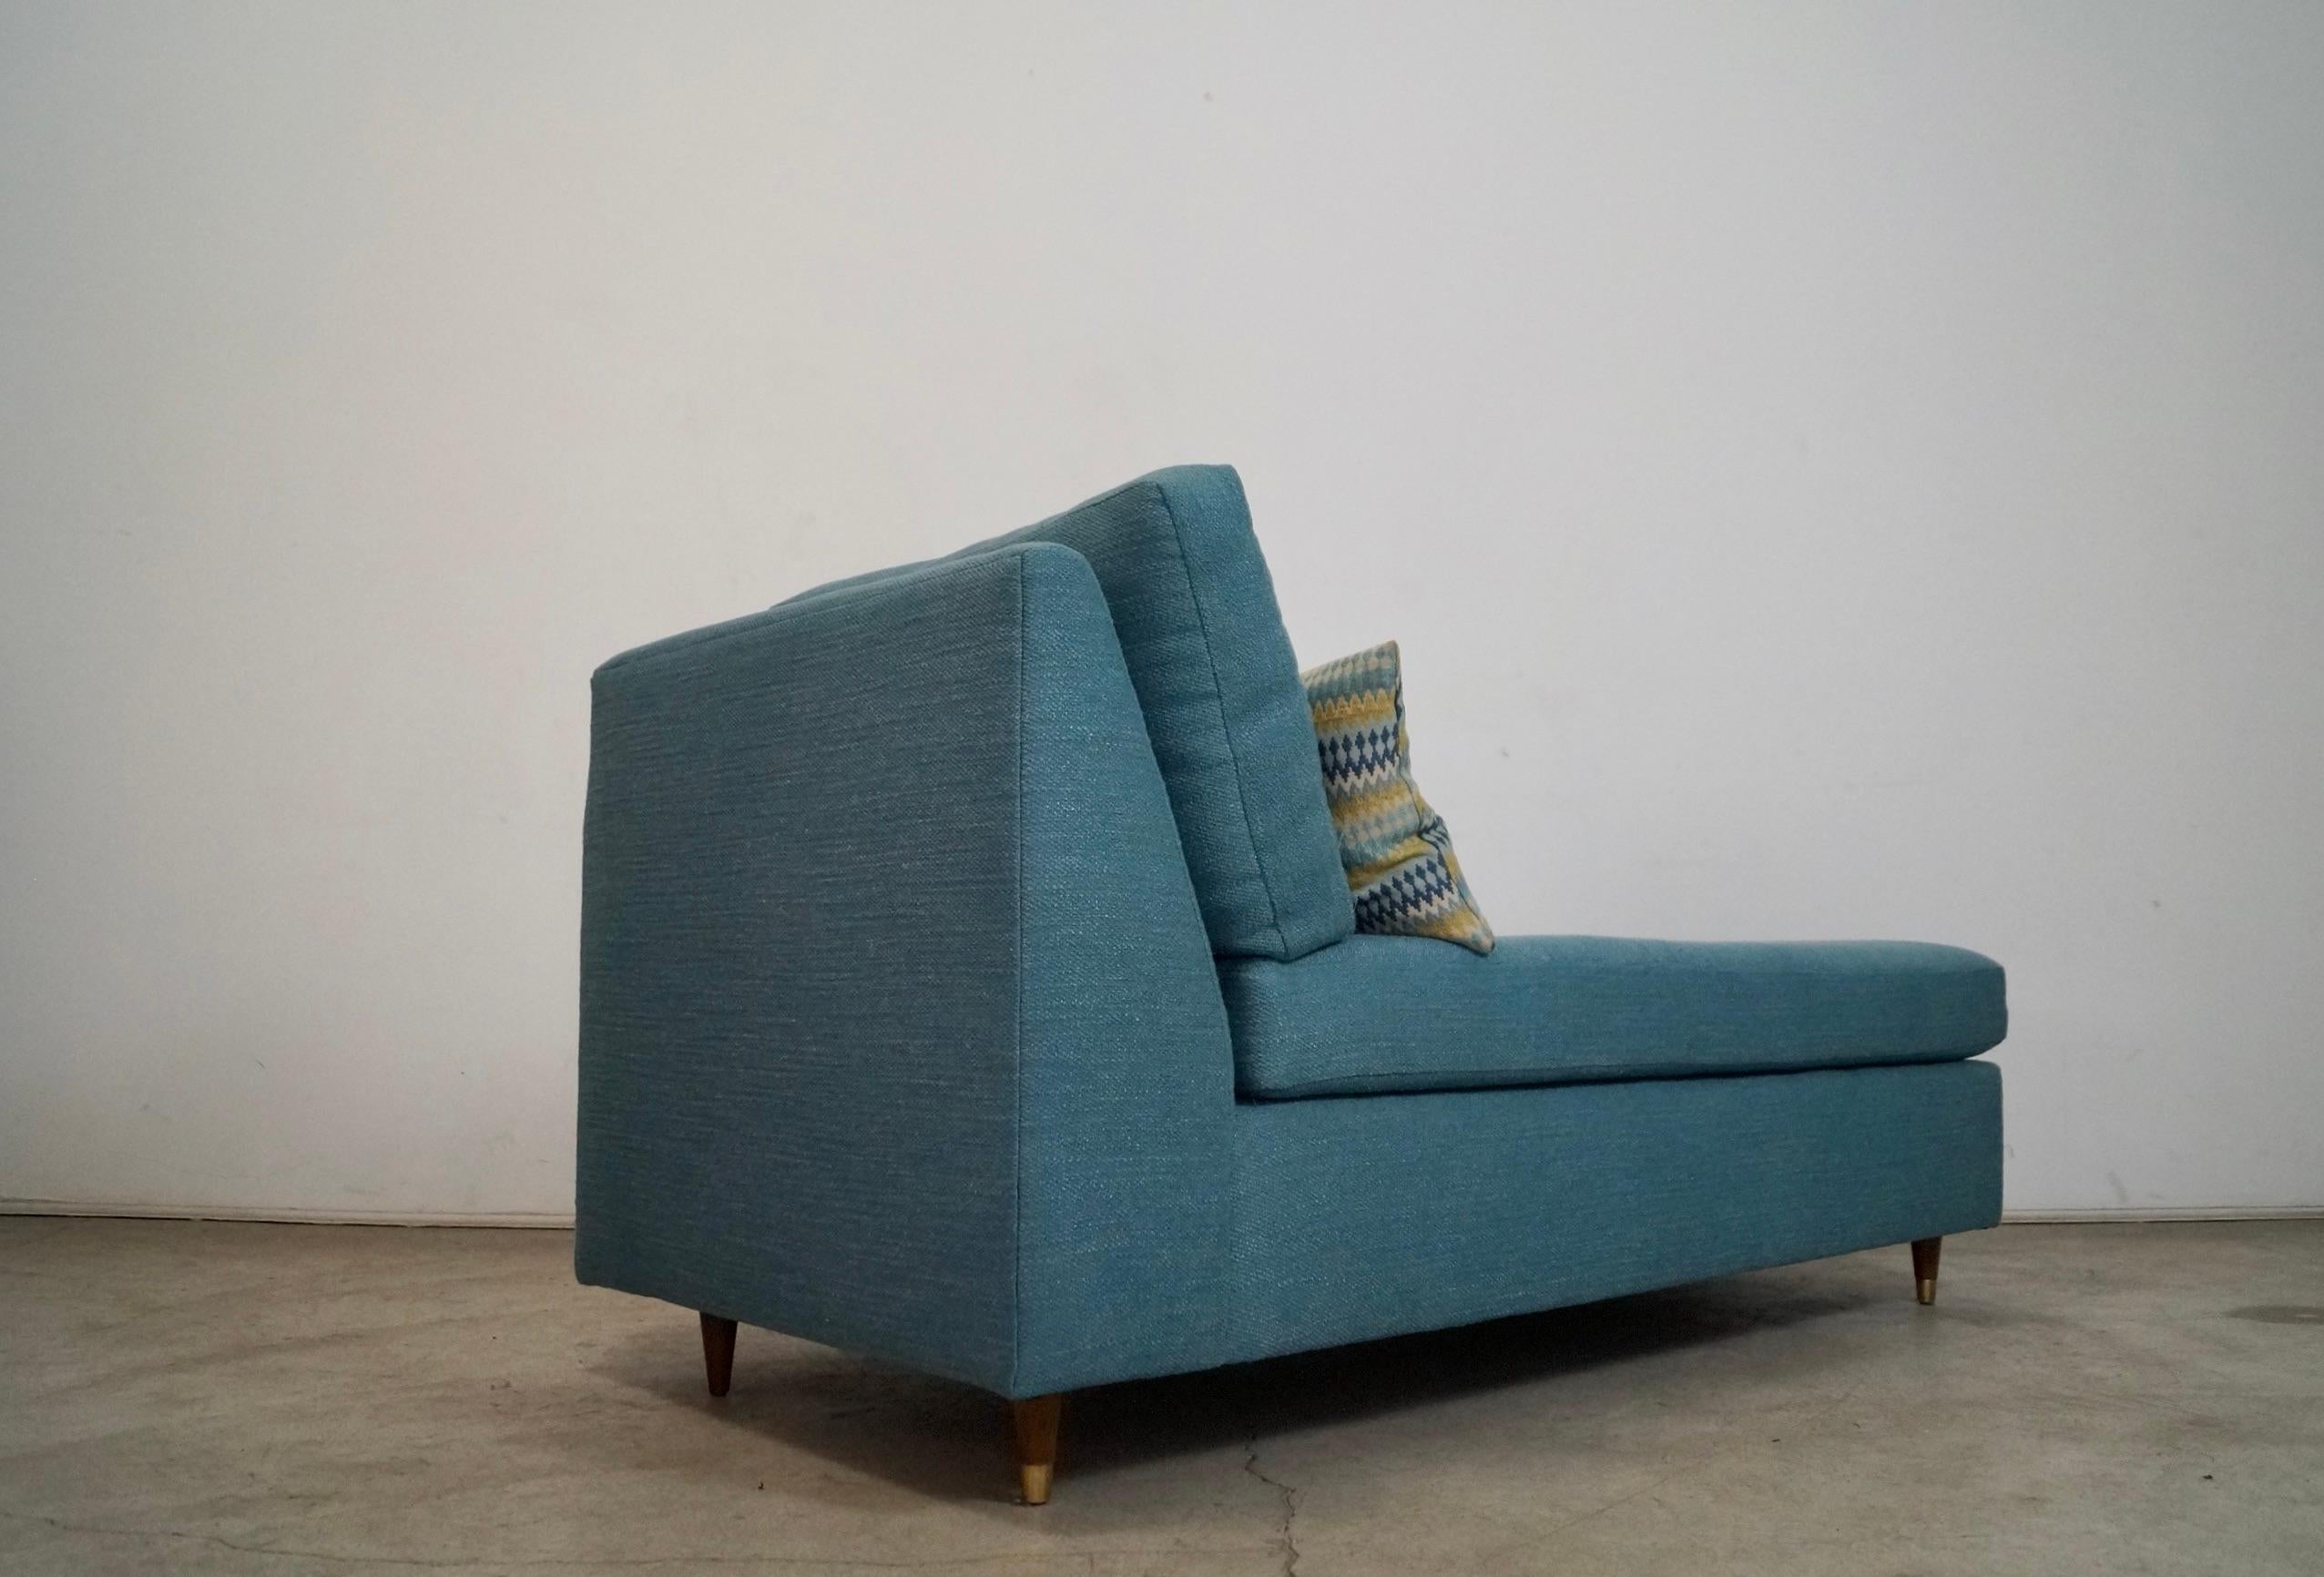 1970's Mid-Century Modern Single Arm Reupholstered Chaise Lounge Daybed For Sale 9